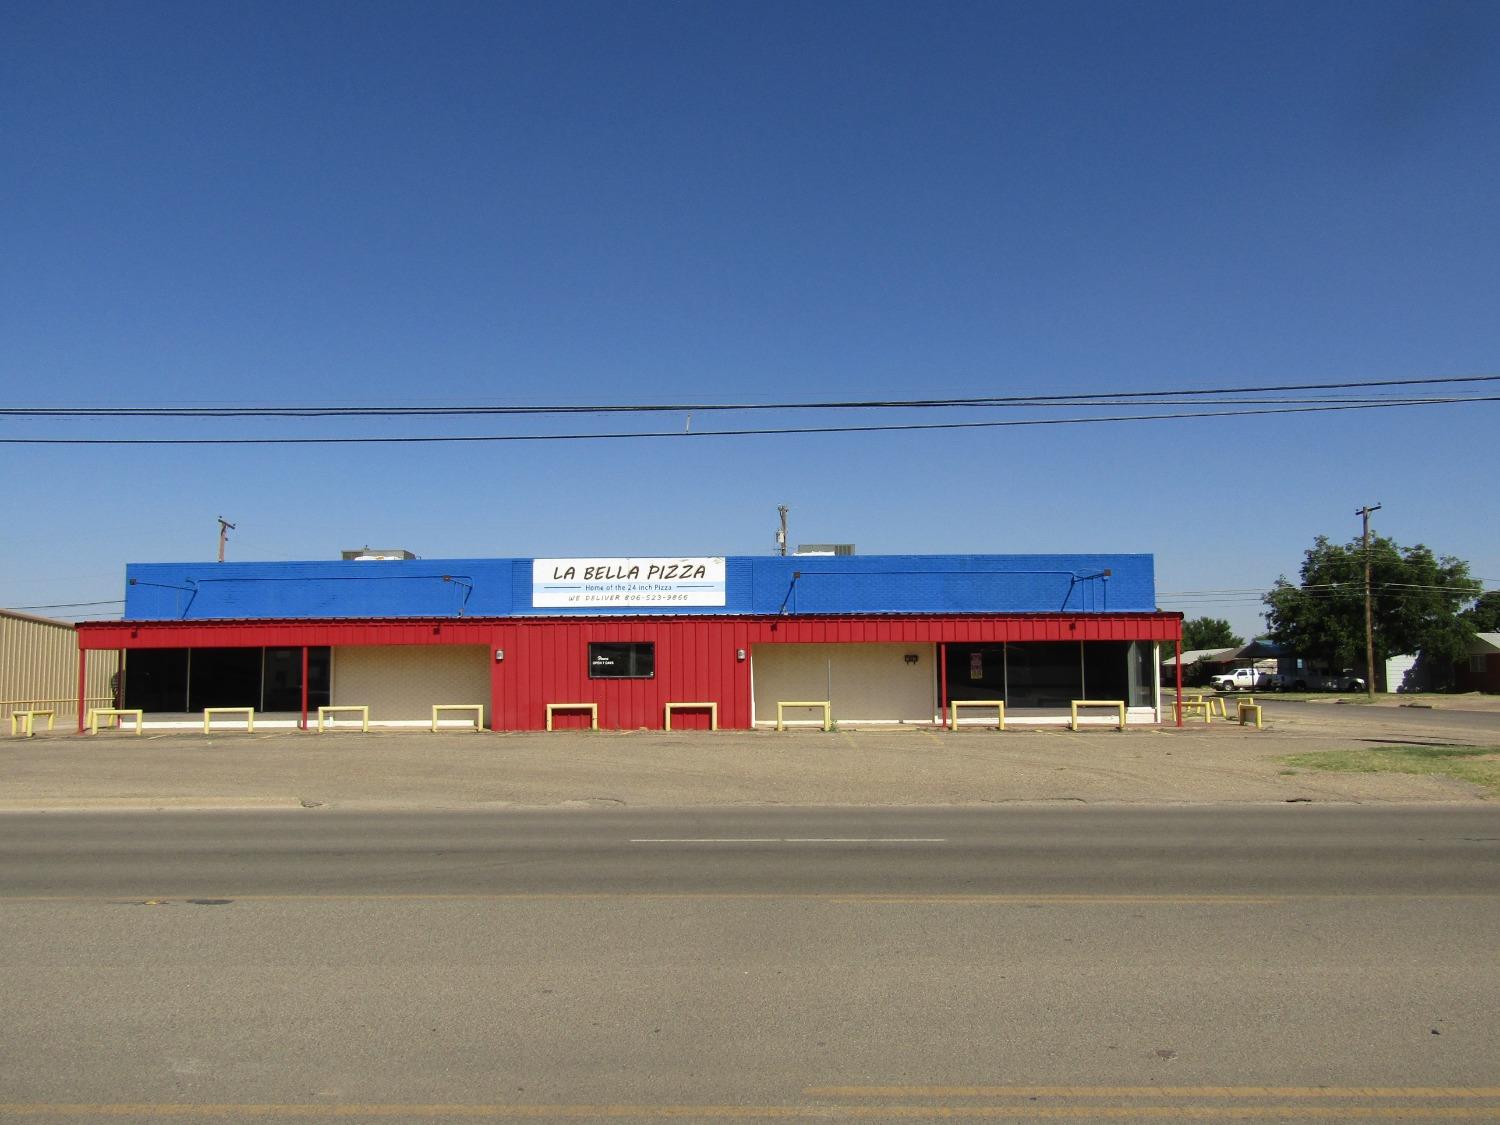 Excellent location for your New Restaurant!  High traffic and visibility corner location near new development.  Over 3600 sq. ft. restaurant facility that also could be adapted to retail or office use.  Call today for more details and a private showing!